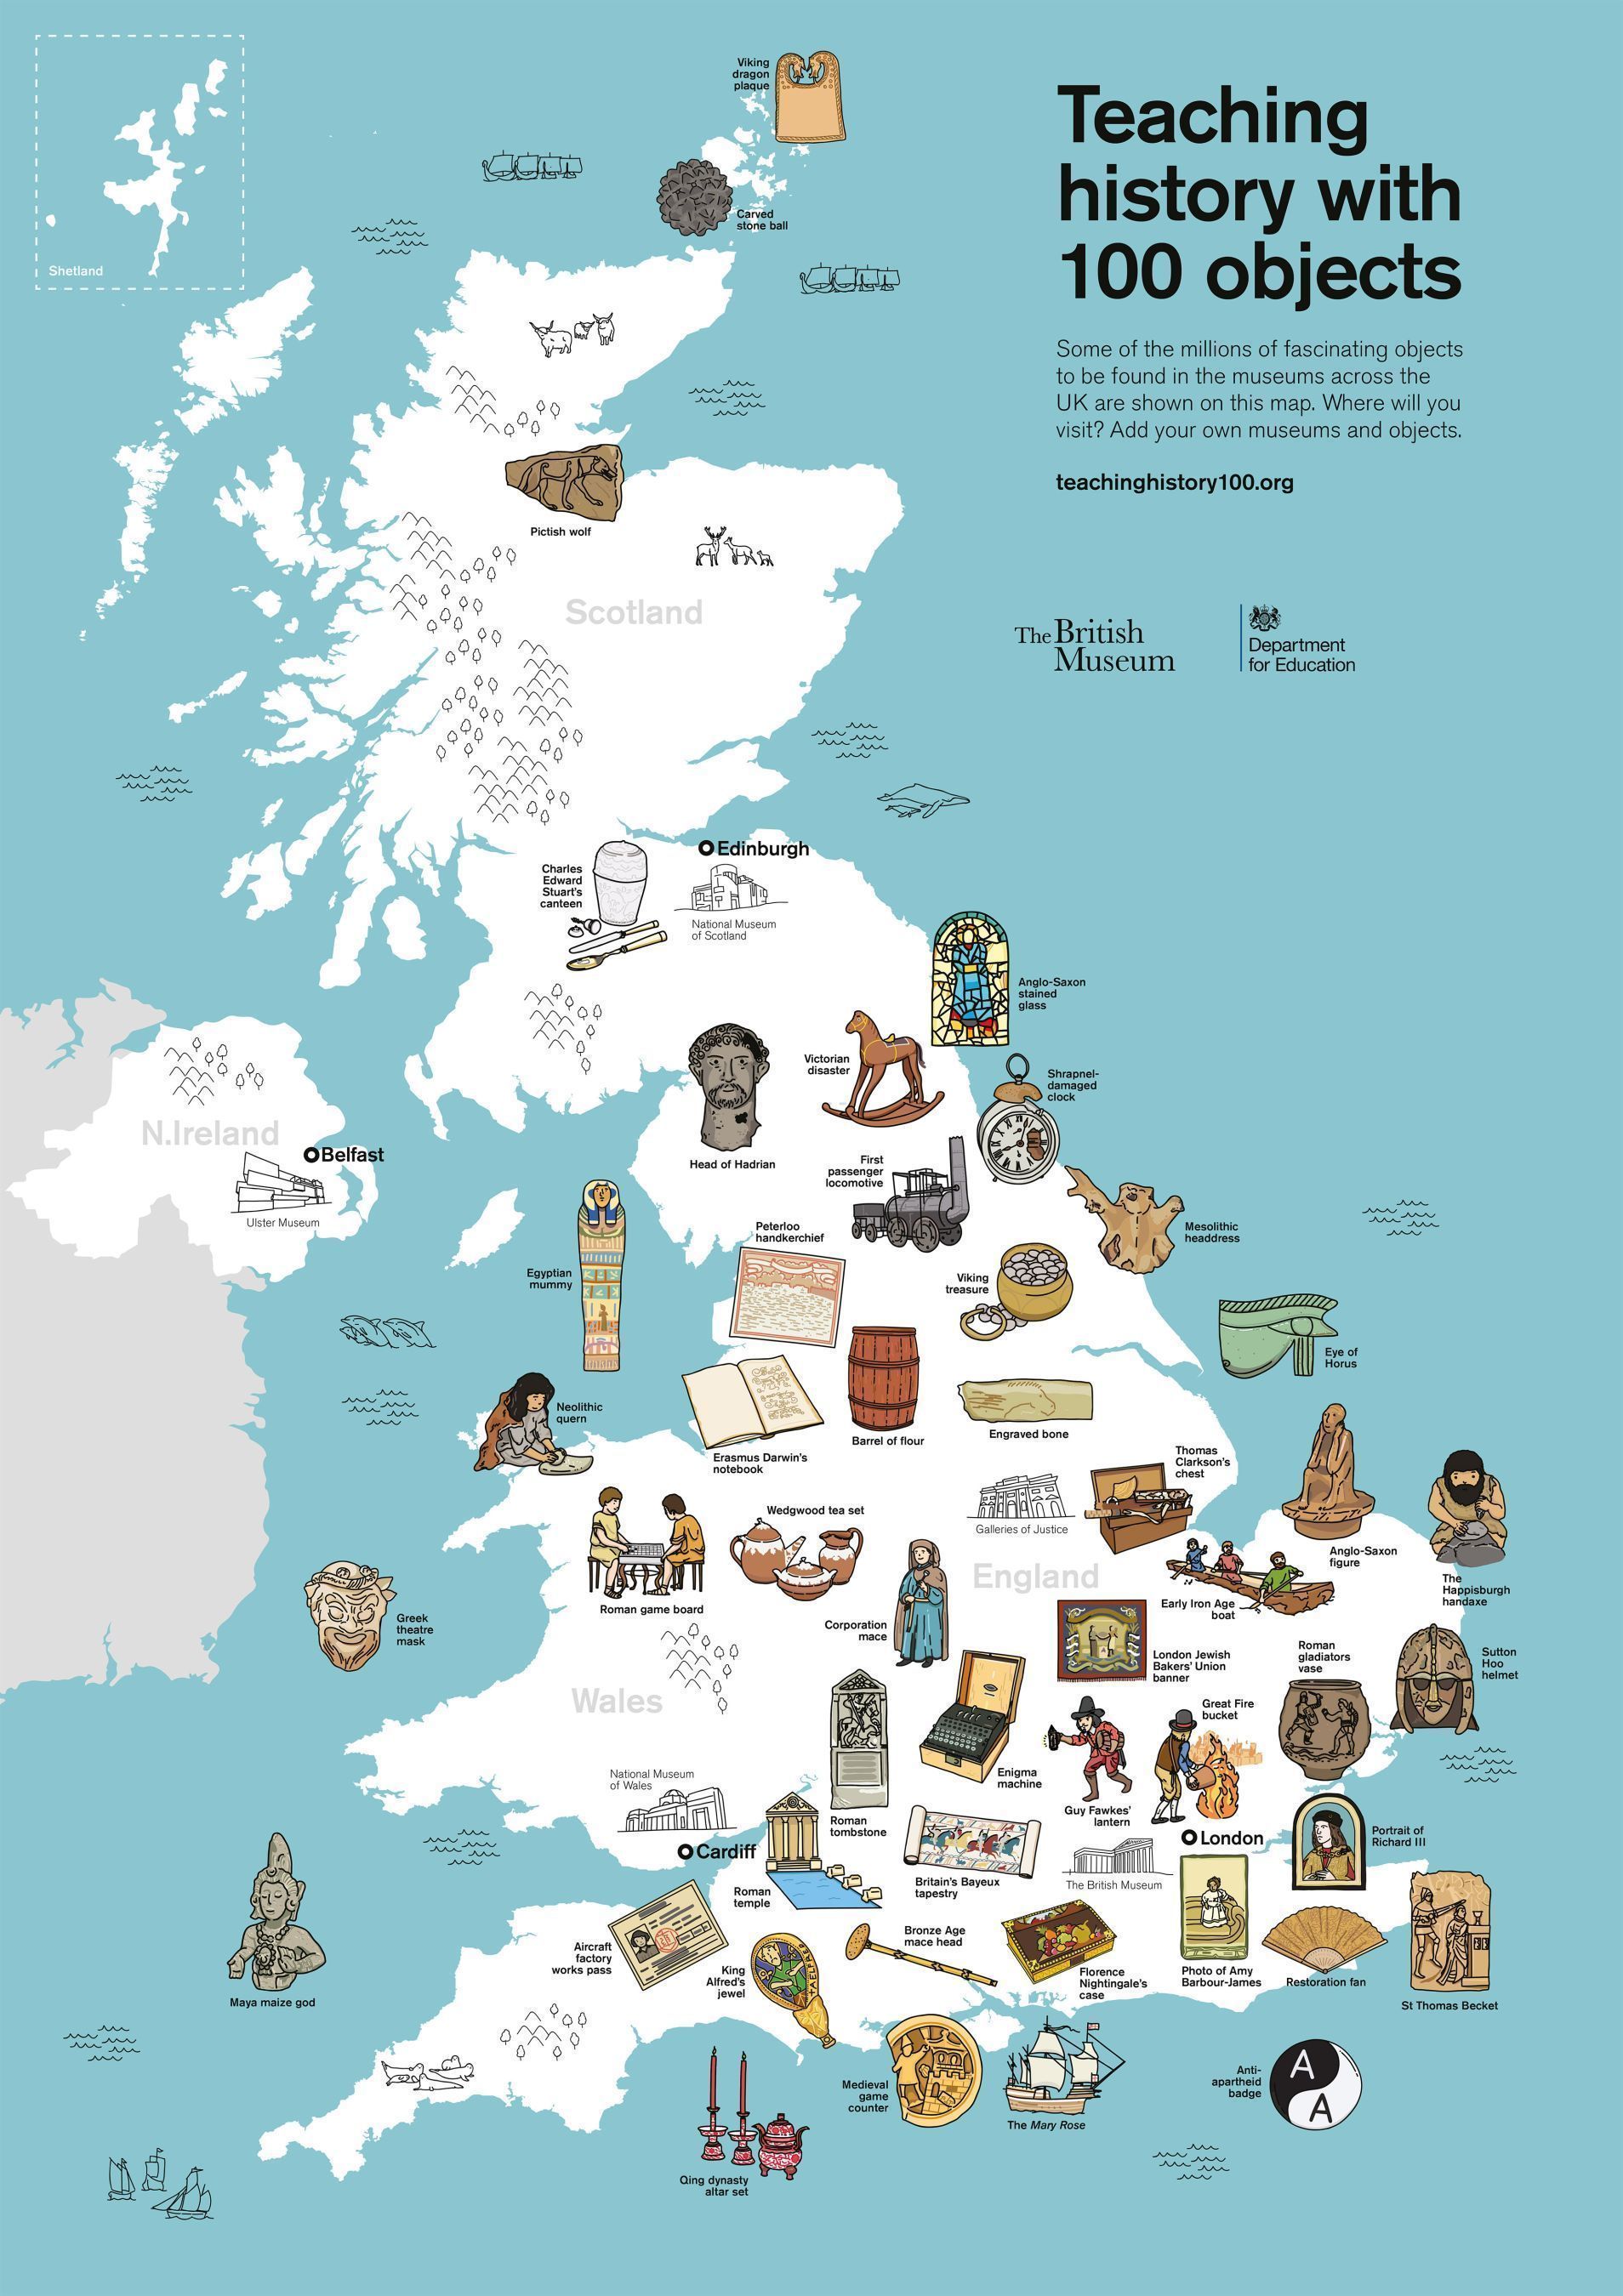 Teaching history with 100 objects, map resource showing objects from 40 museums across the UK. Â(C) The Trustees of the British Museum. (PRNewsFoto/TES Global)